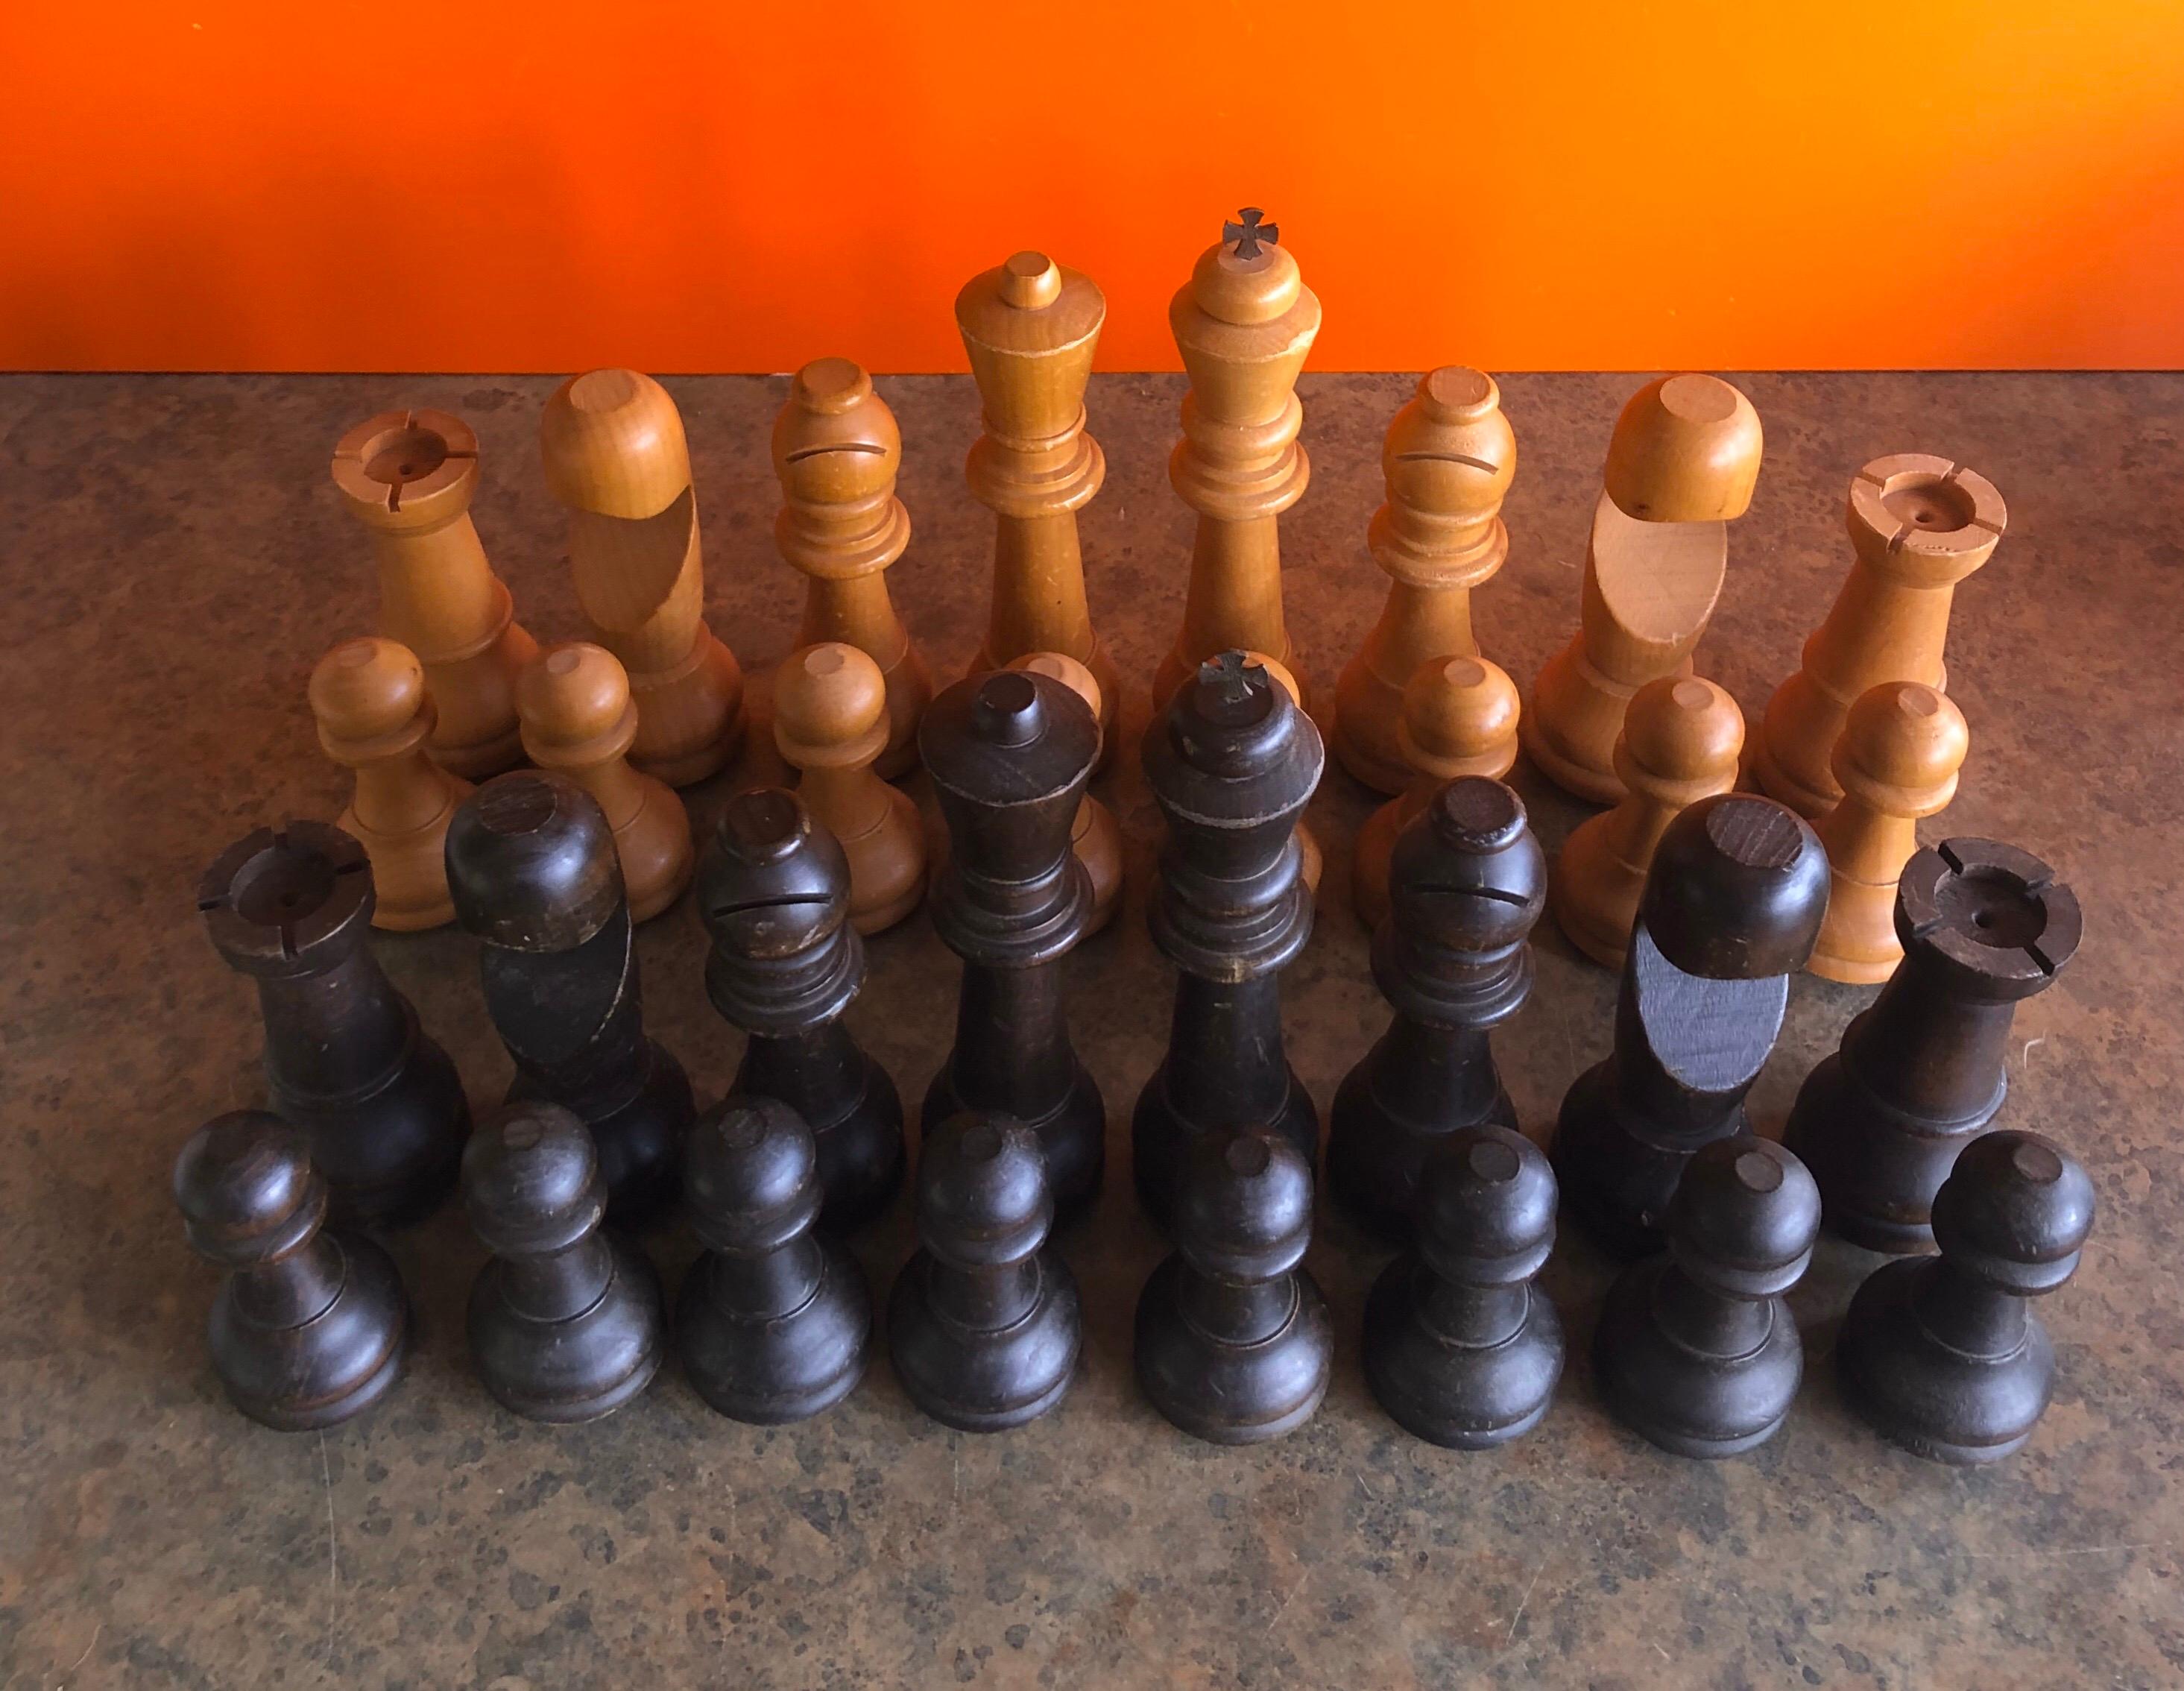 Vintage set of oversized hand carved wooden chess pieces, circa 1970s. The pawns measure 4.5